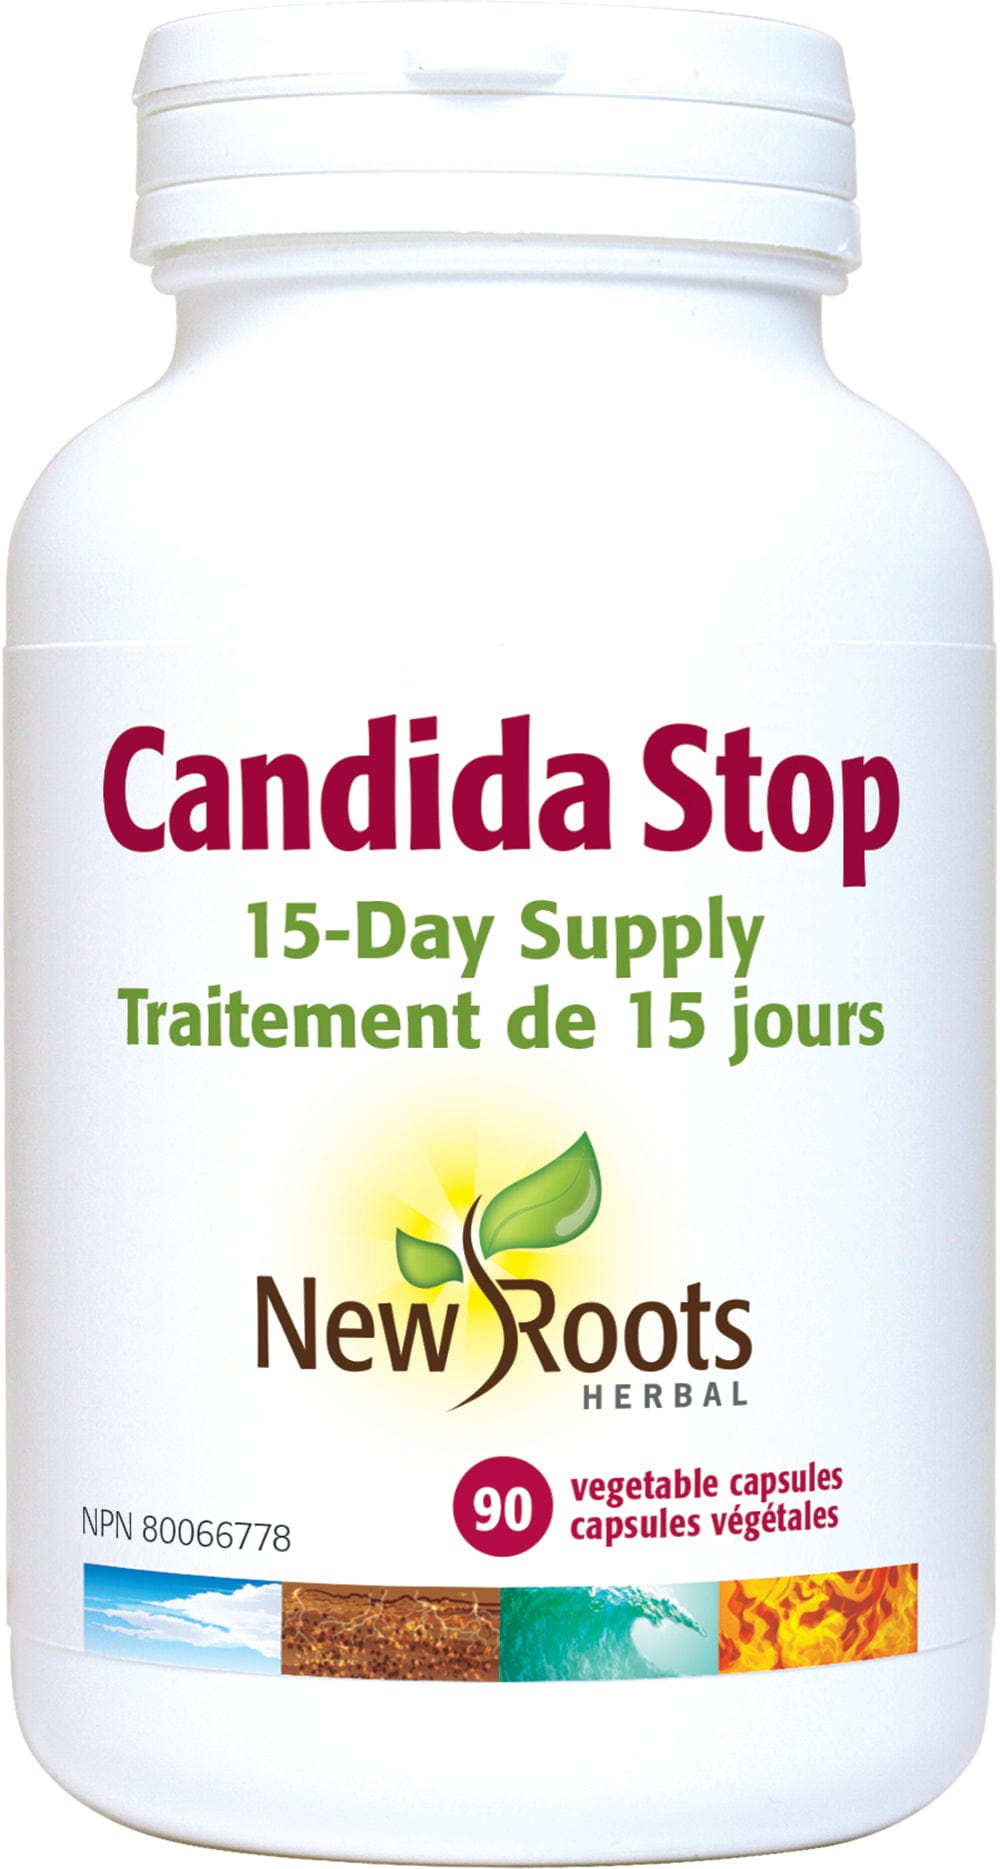 NEW ROOTS HERBAL Suppléments Candida Stop 90caps